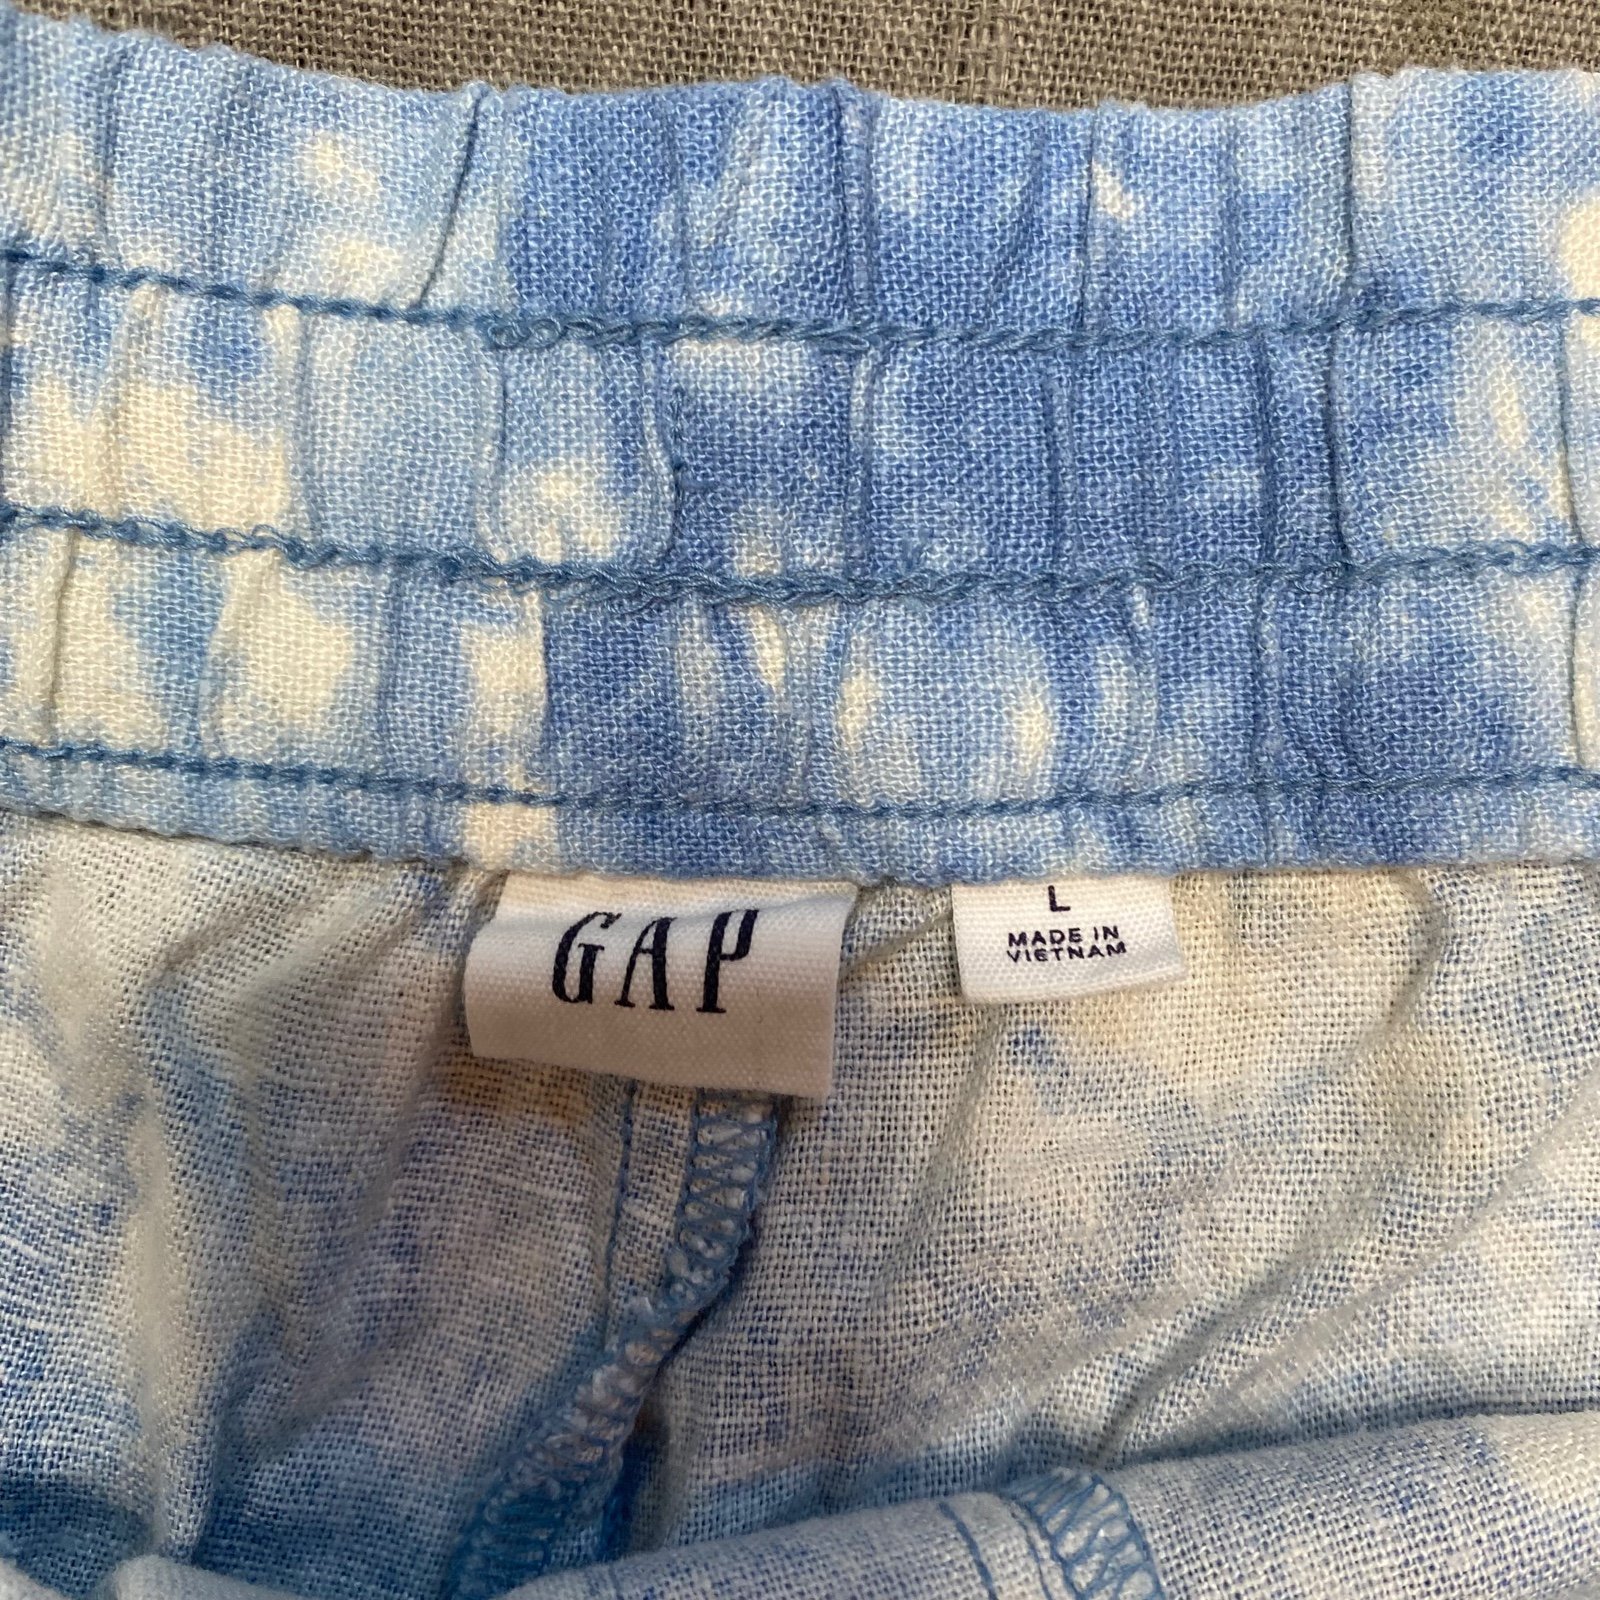 The Best Seller Tie dye blue and white pull on shorts pOb15oeAC best sale